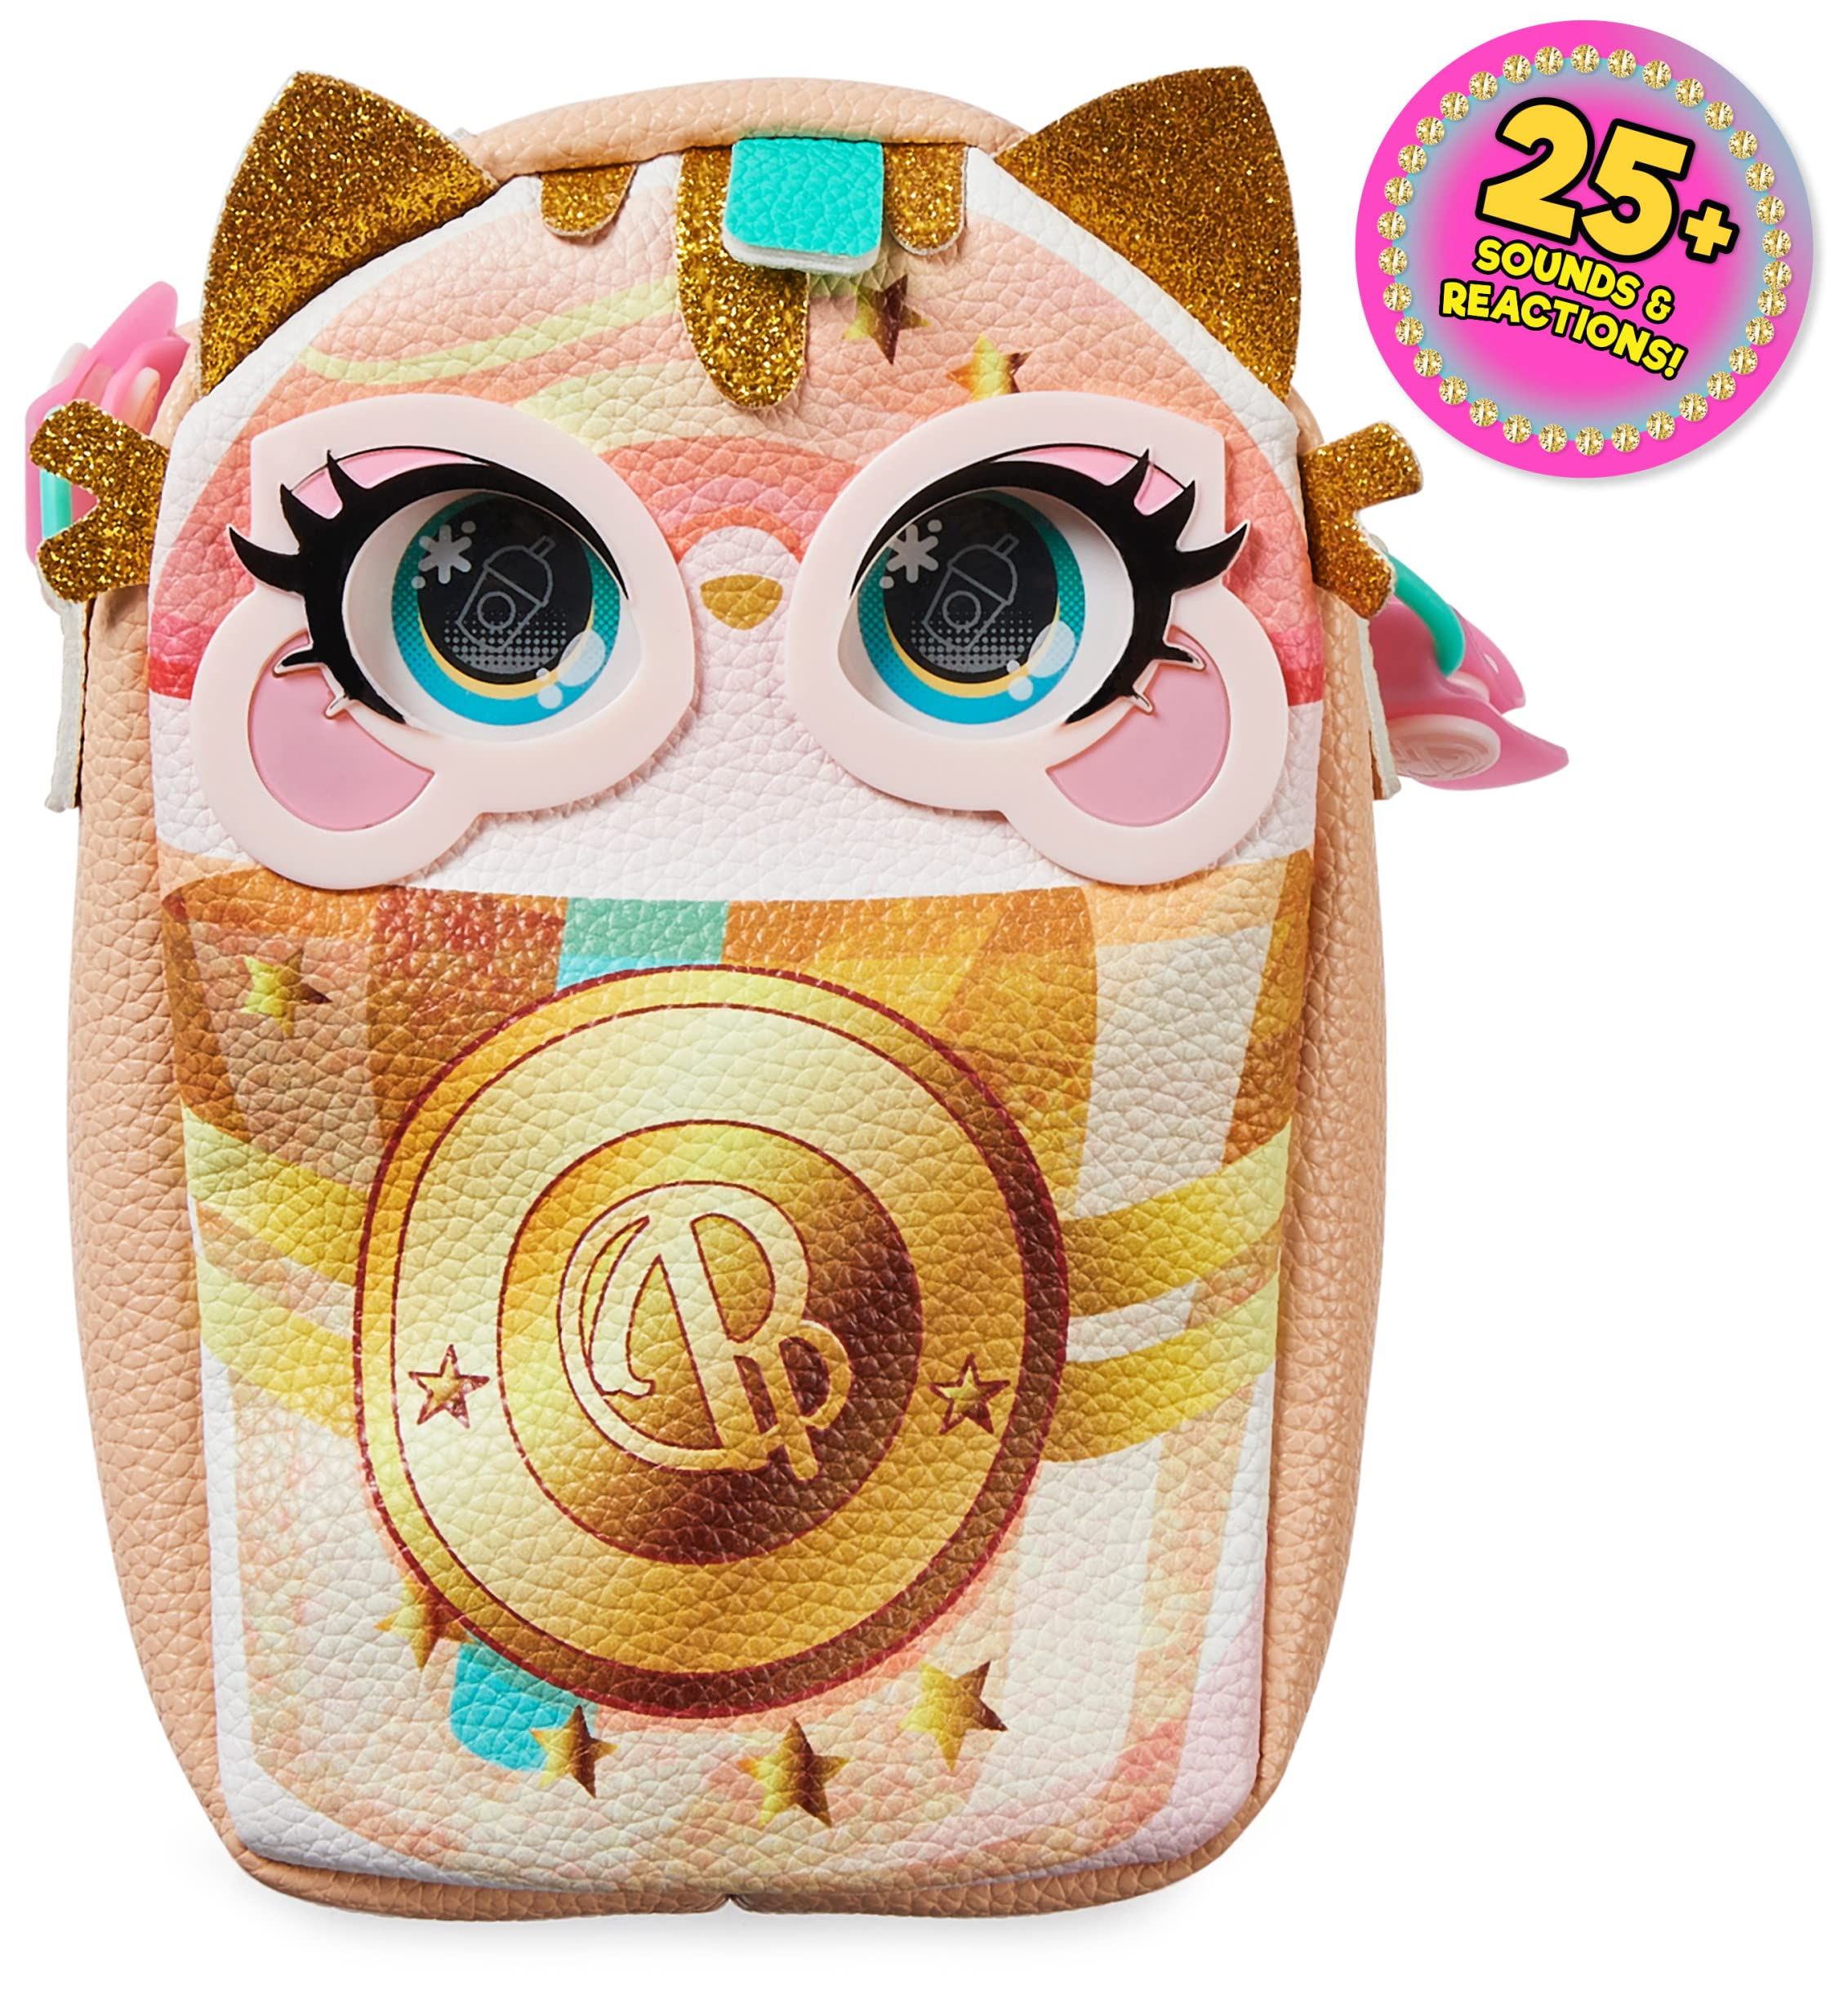 Purse Pets, Treat Yo Self Catpuchino Interactive Pet Toy & Girls Crossbody Bag with Lights, Over 25 Sounds & Reactions, Trendy Kids Purse, Tween Gifts